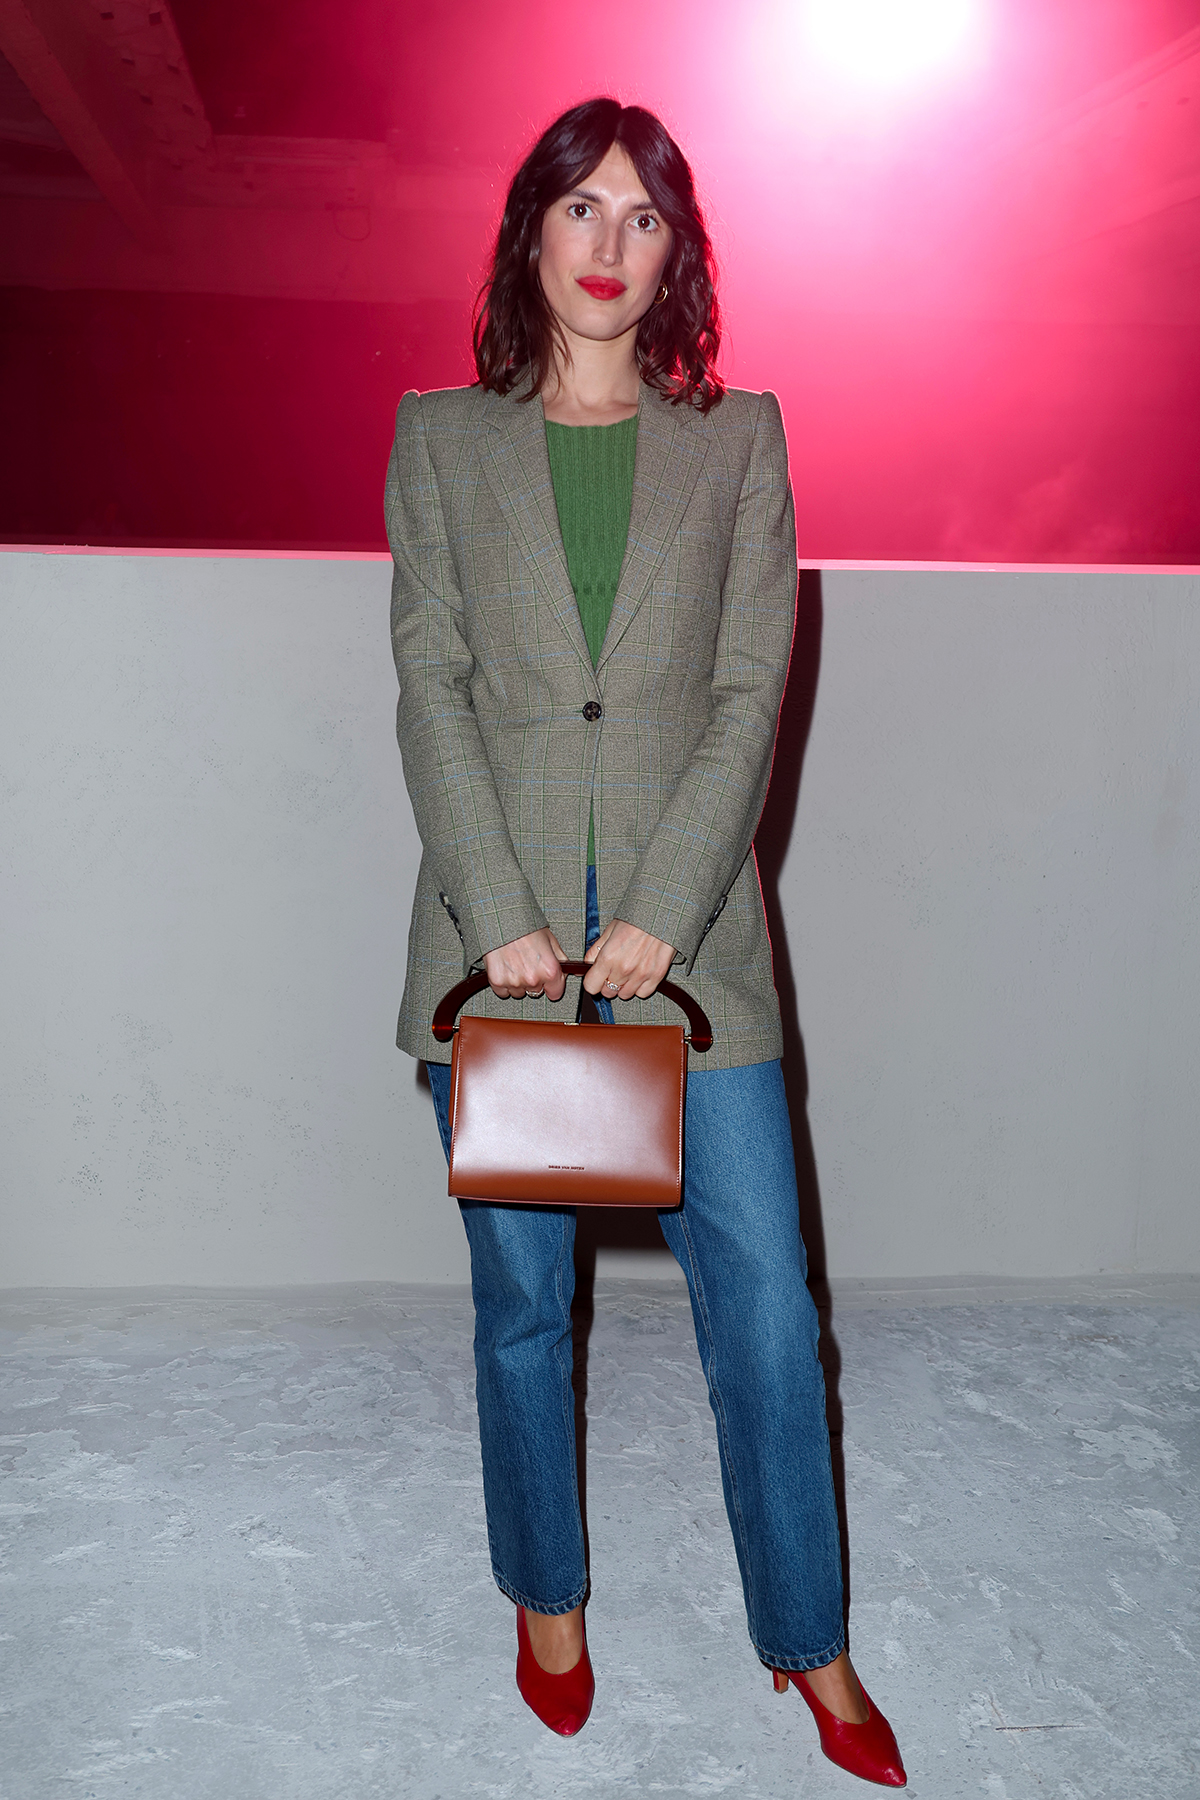 Jeanne-Damas-attends-the-Dries-Van-Noten-getty-images